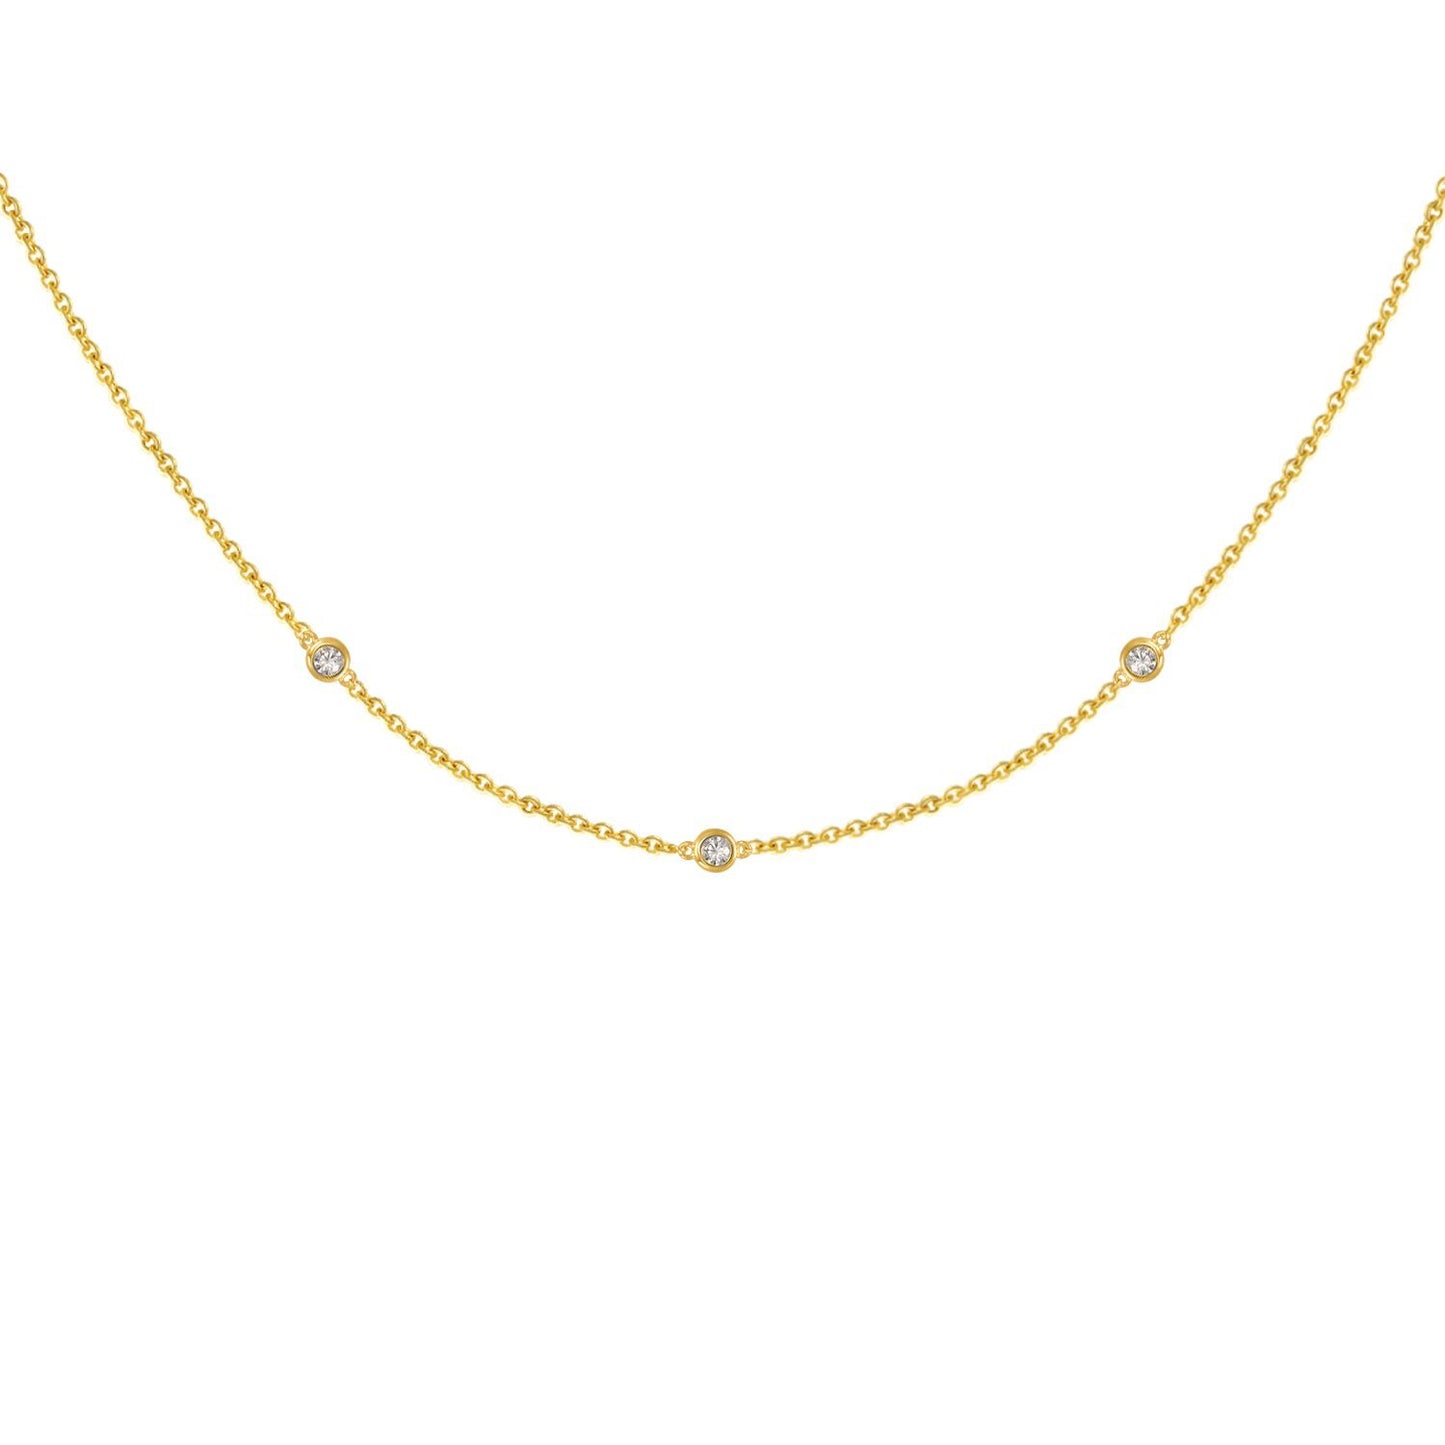 Gold necklace with three CZ stones.